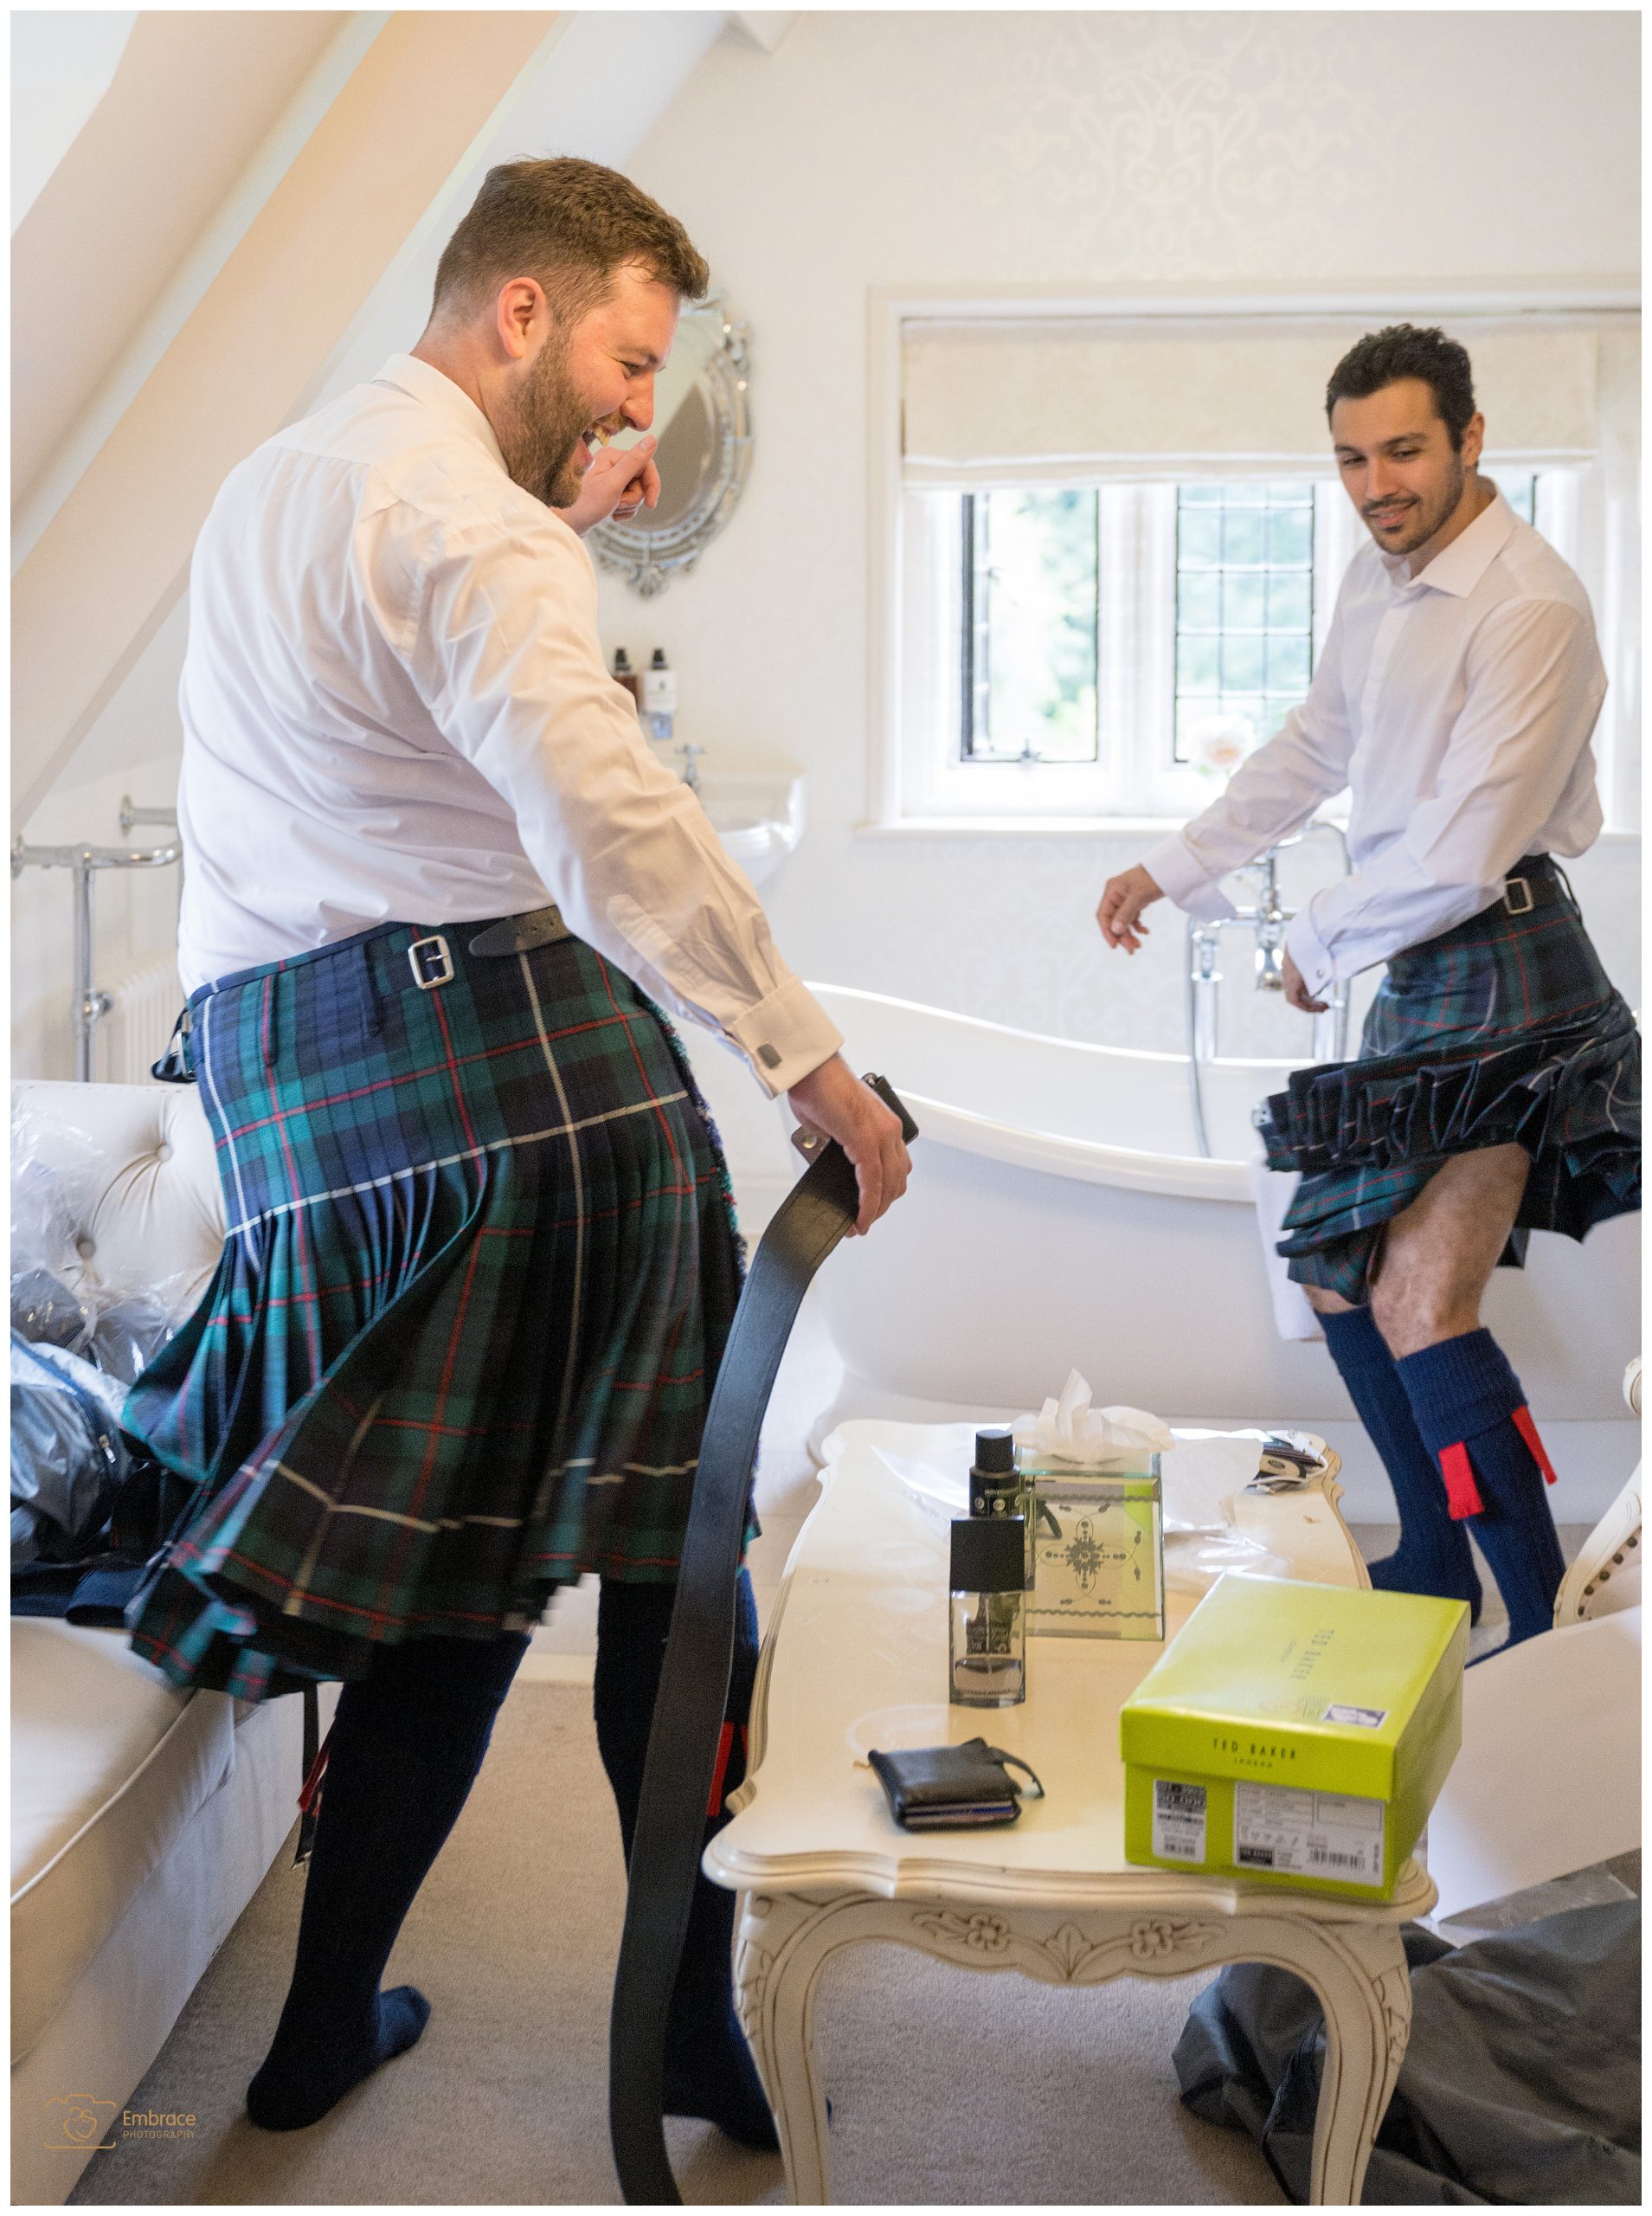 Two groomsmen having fun in their kilts whilst getting ready for the wedding ceremony.